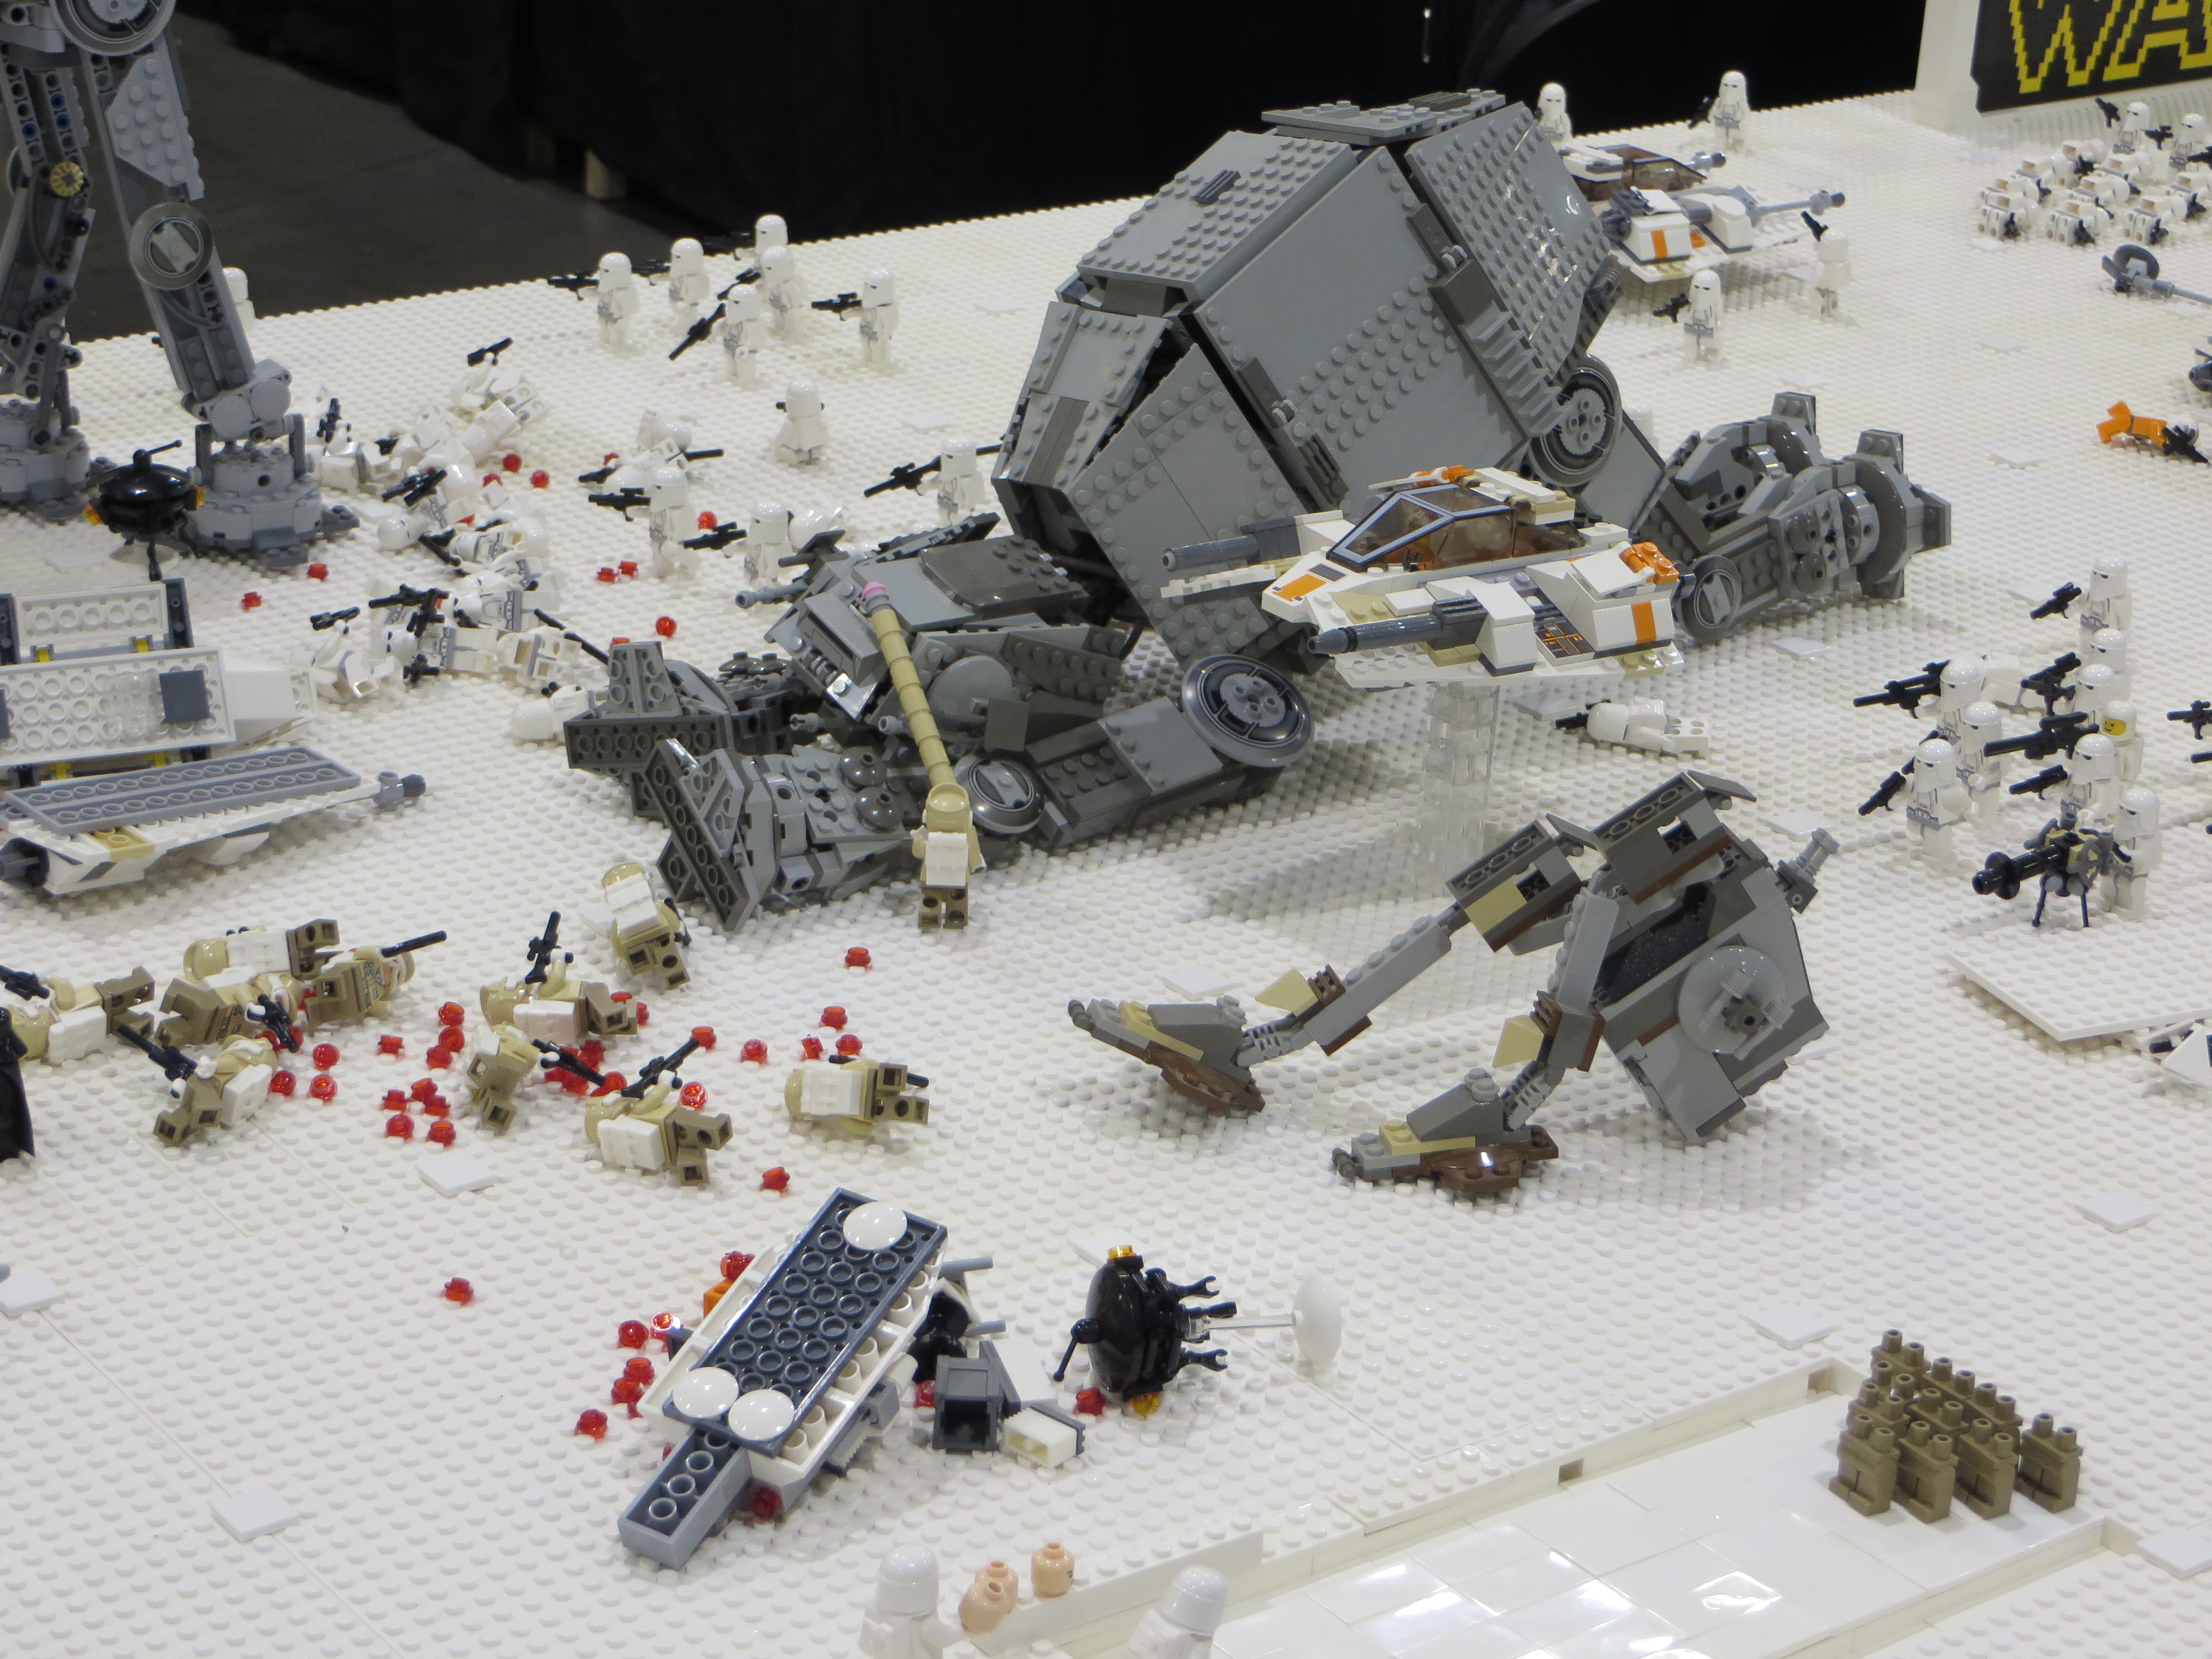 Destroyed AT-AT